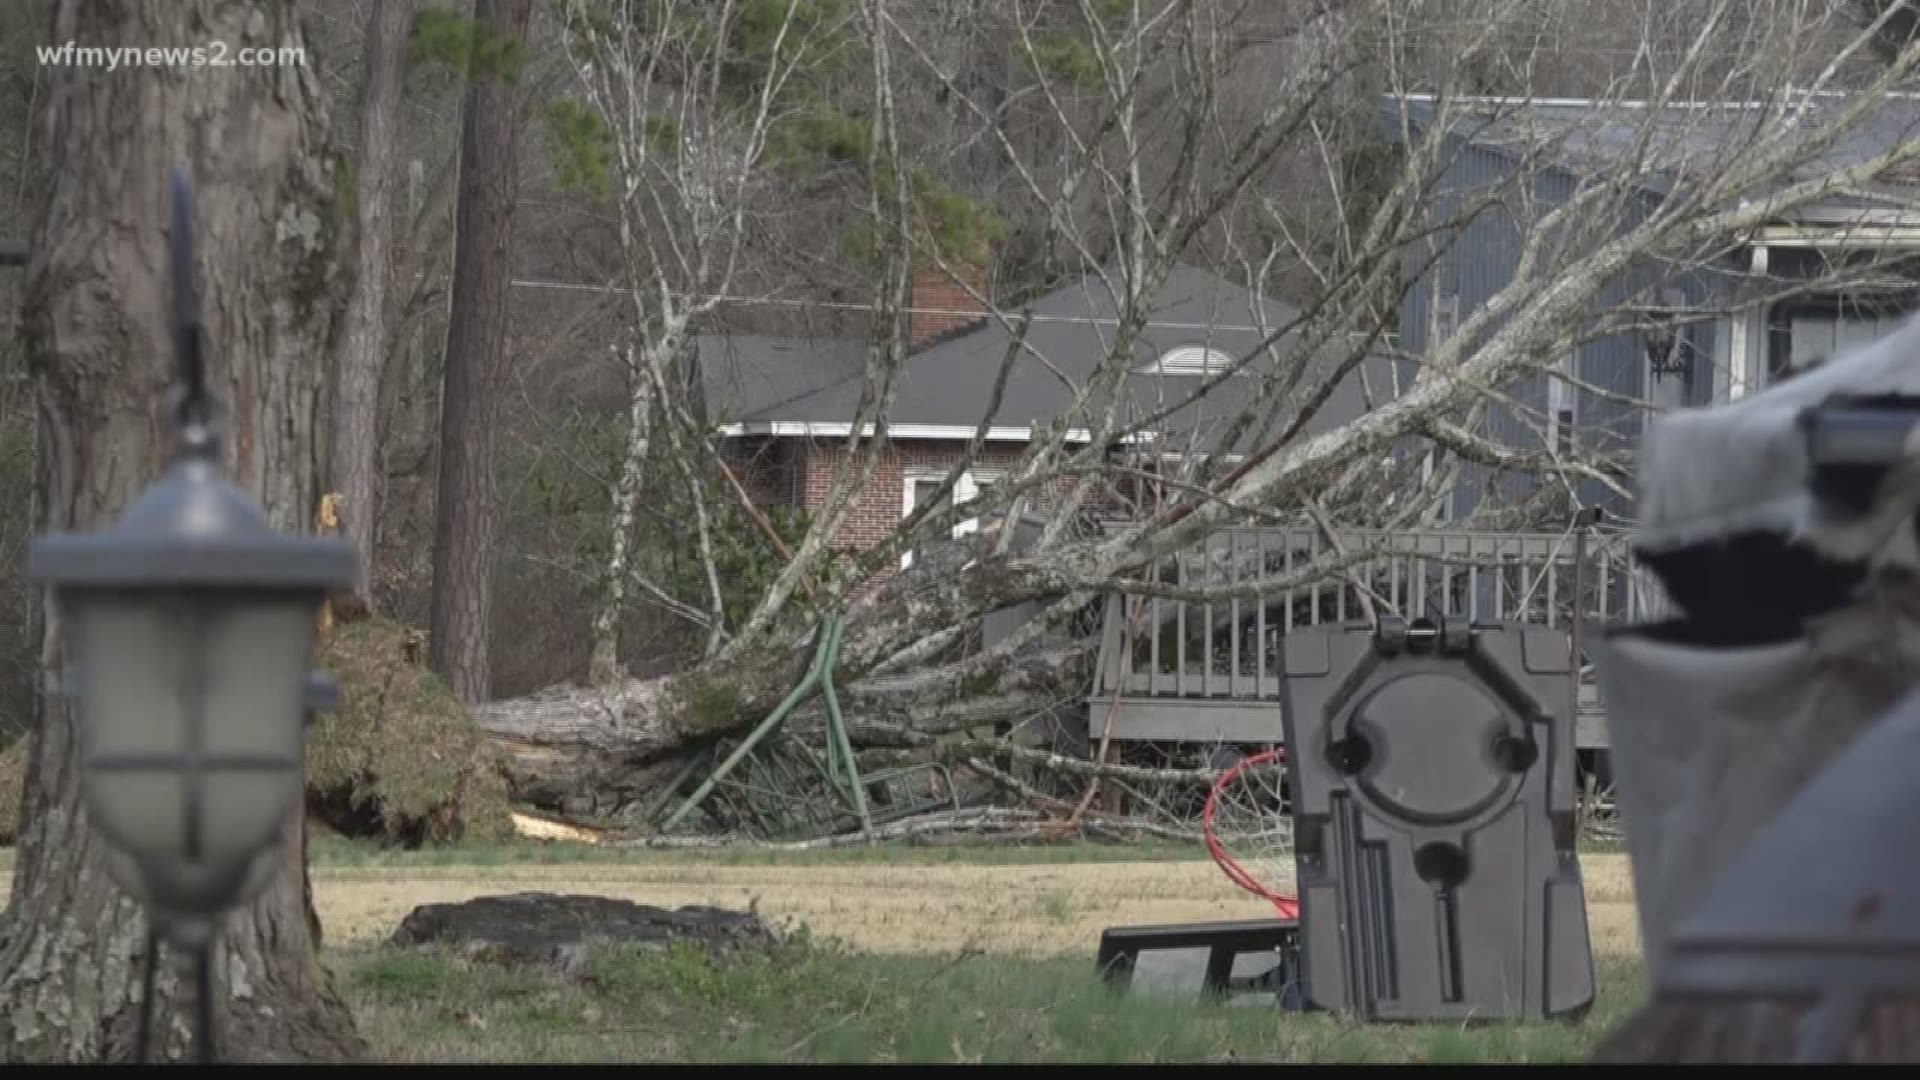 The National Weather Service confirms an EF-1 tornado touched down in Randolph County.